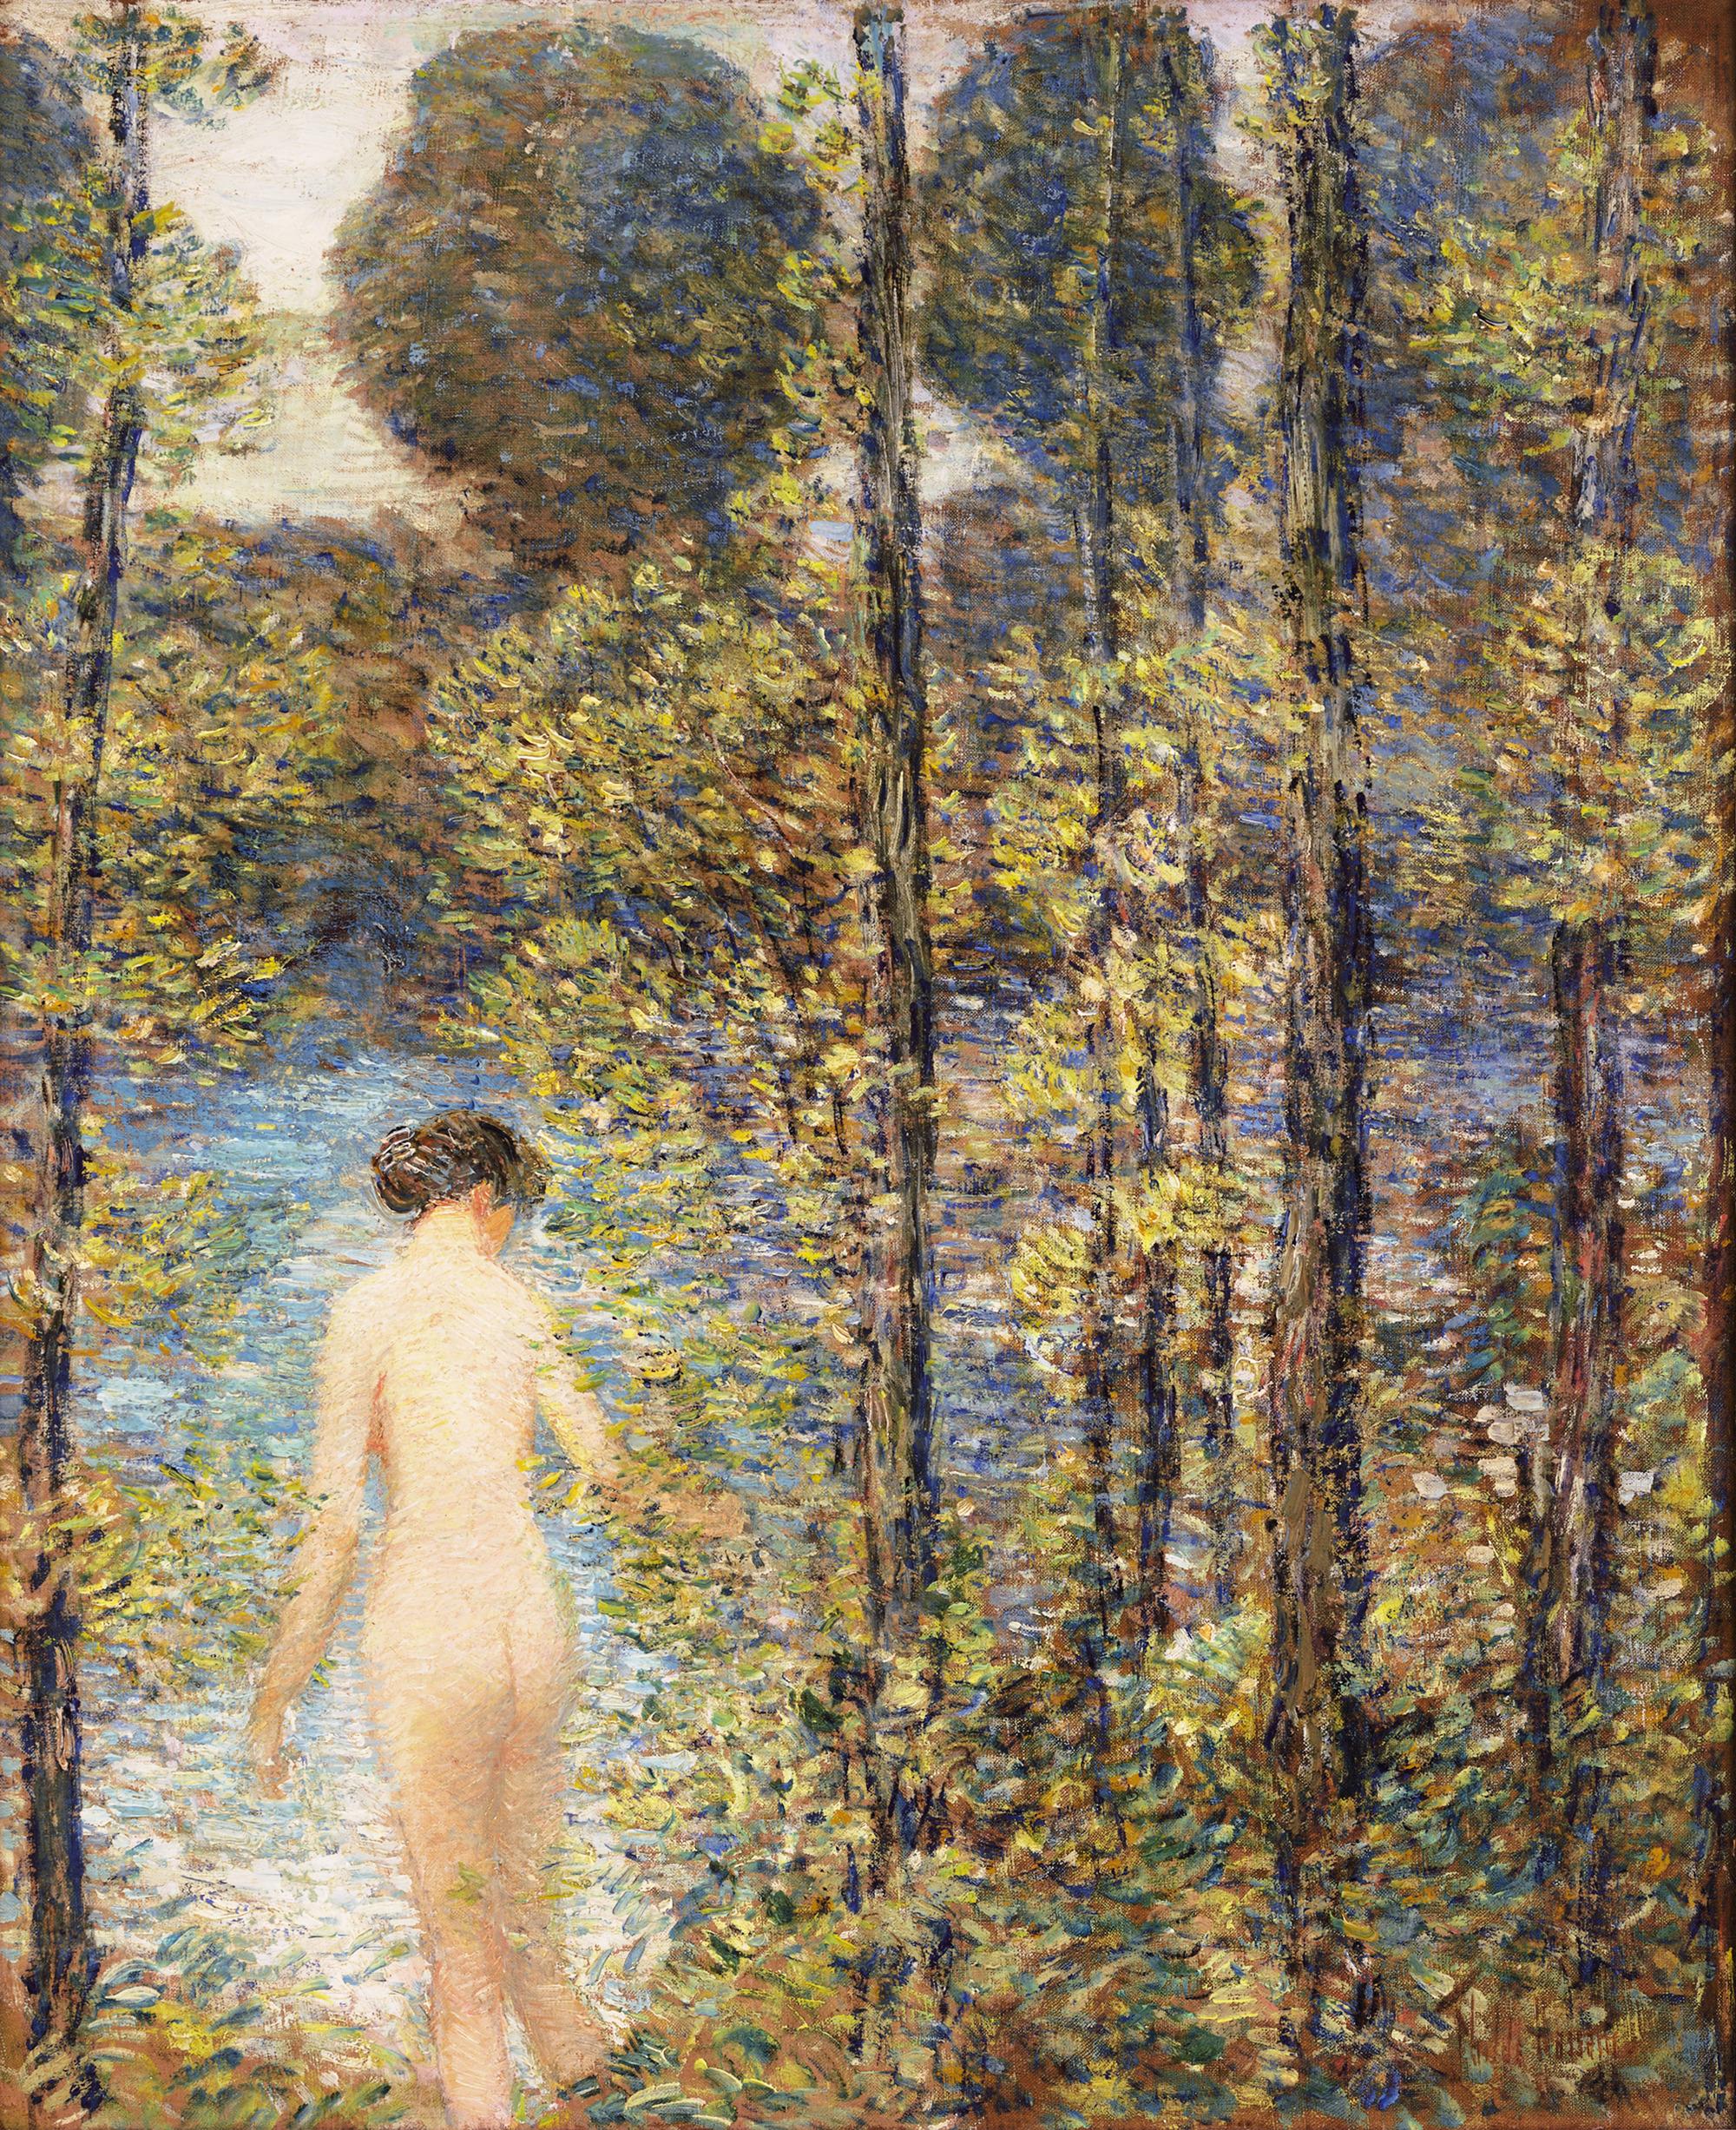 Childe Hassam
1859-1935  American

The Bather

Signed and dated “Childe Hassam” (lower right)
Oil on canvas

Considered by many to be America’s foremost Impressionist painter, Childe Hassam composed his tranquil and intimate oil on canvas The Bather